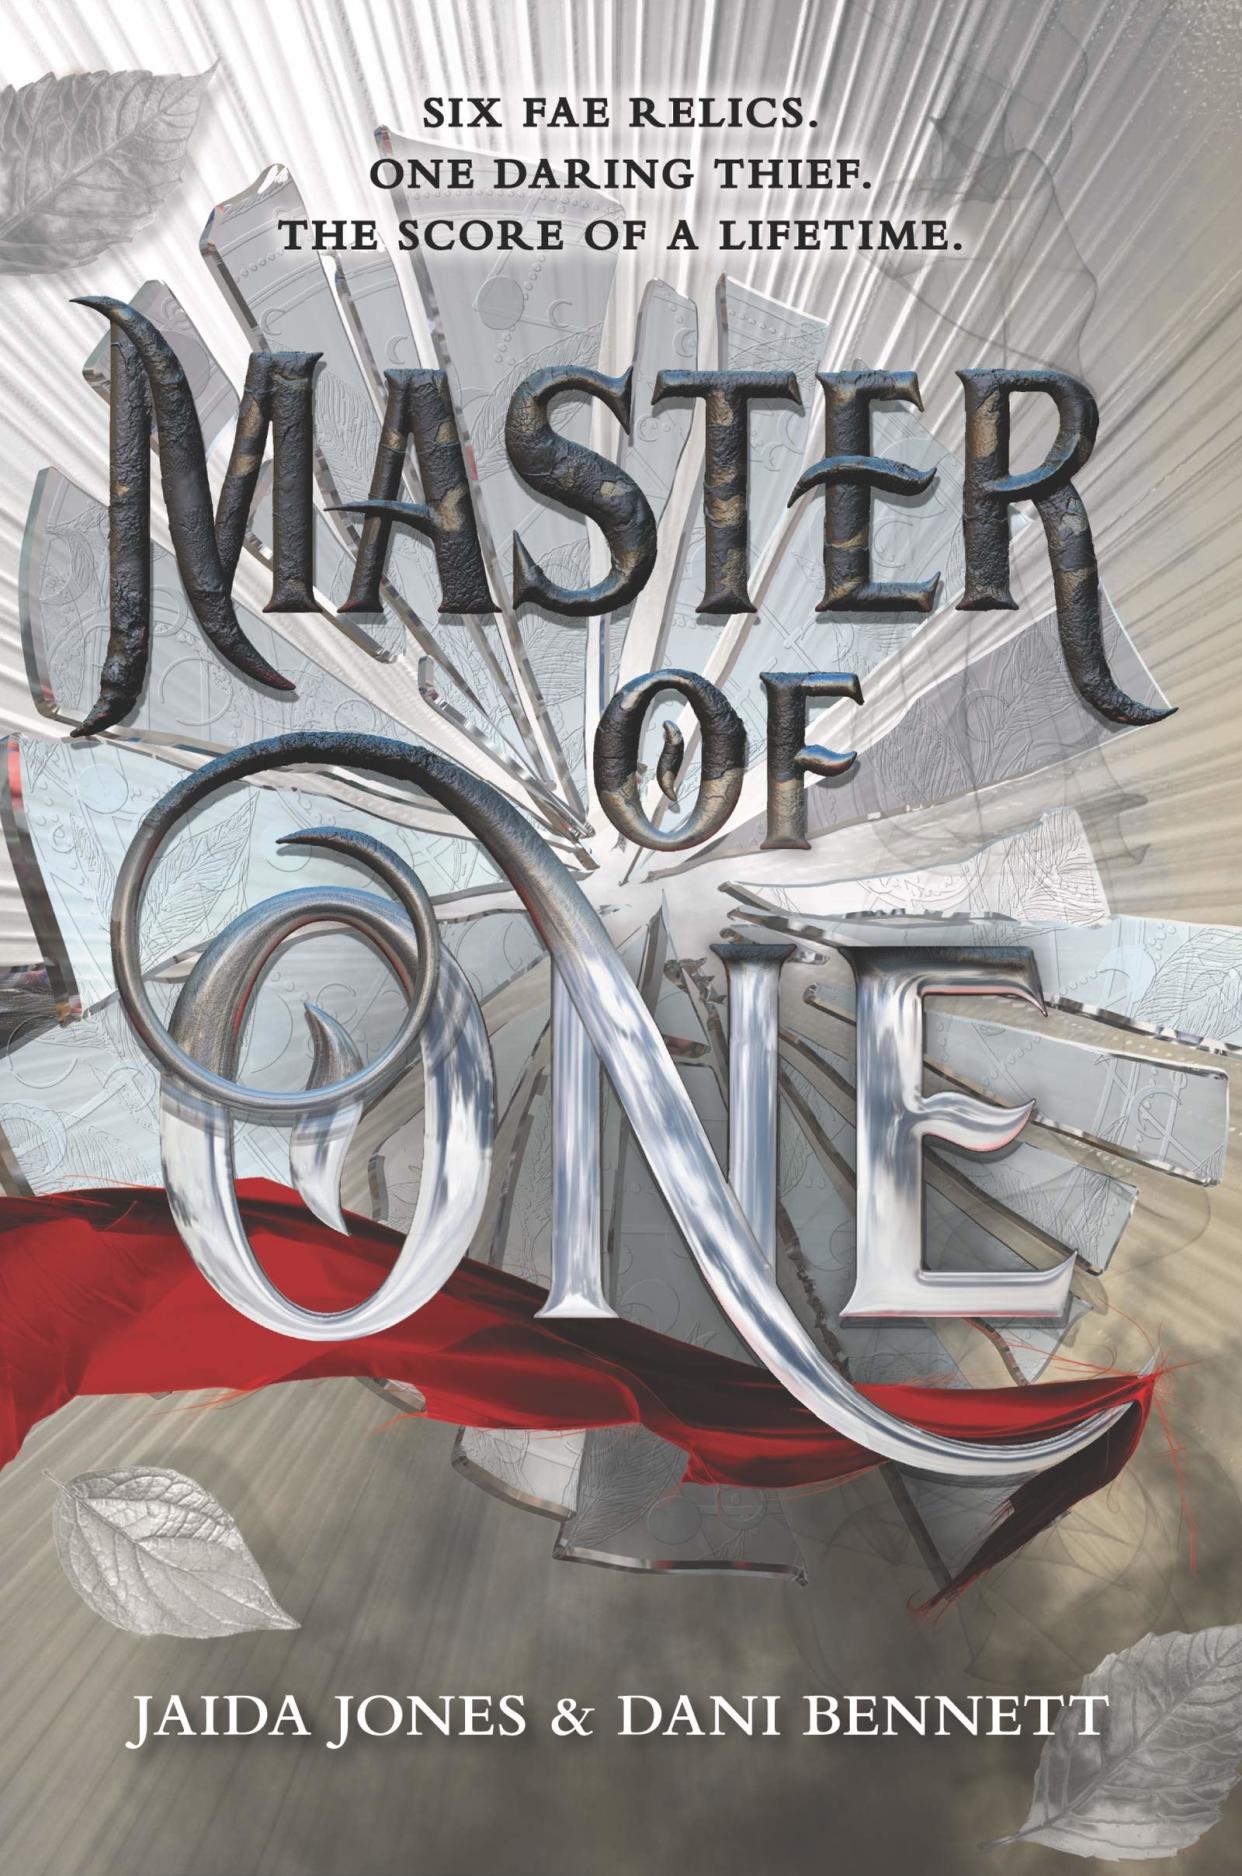 Book cover of "Master of One"